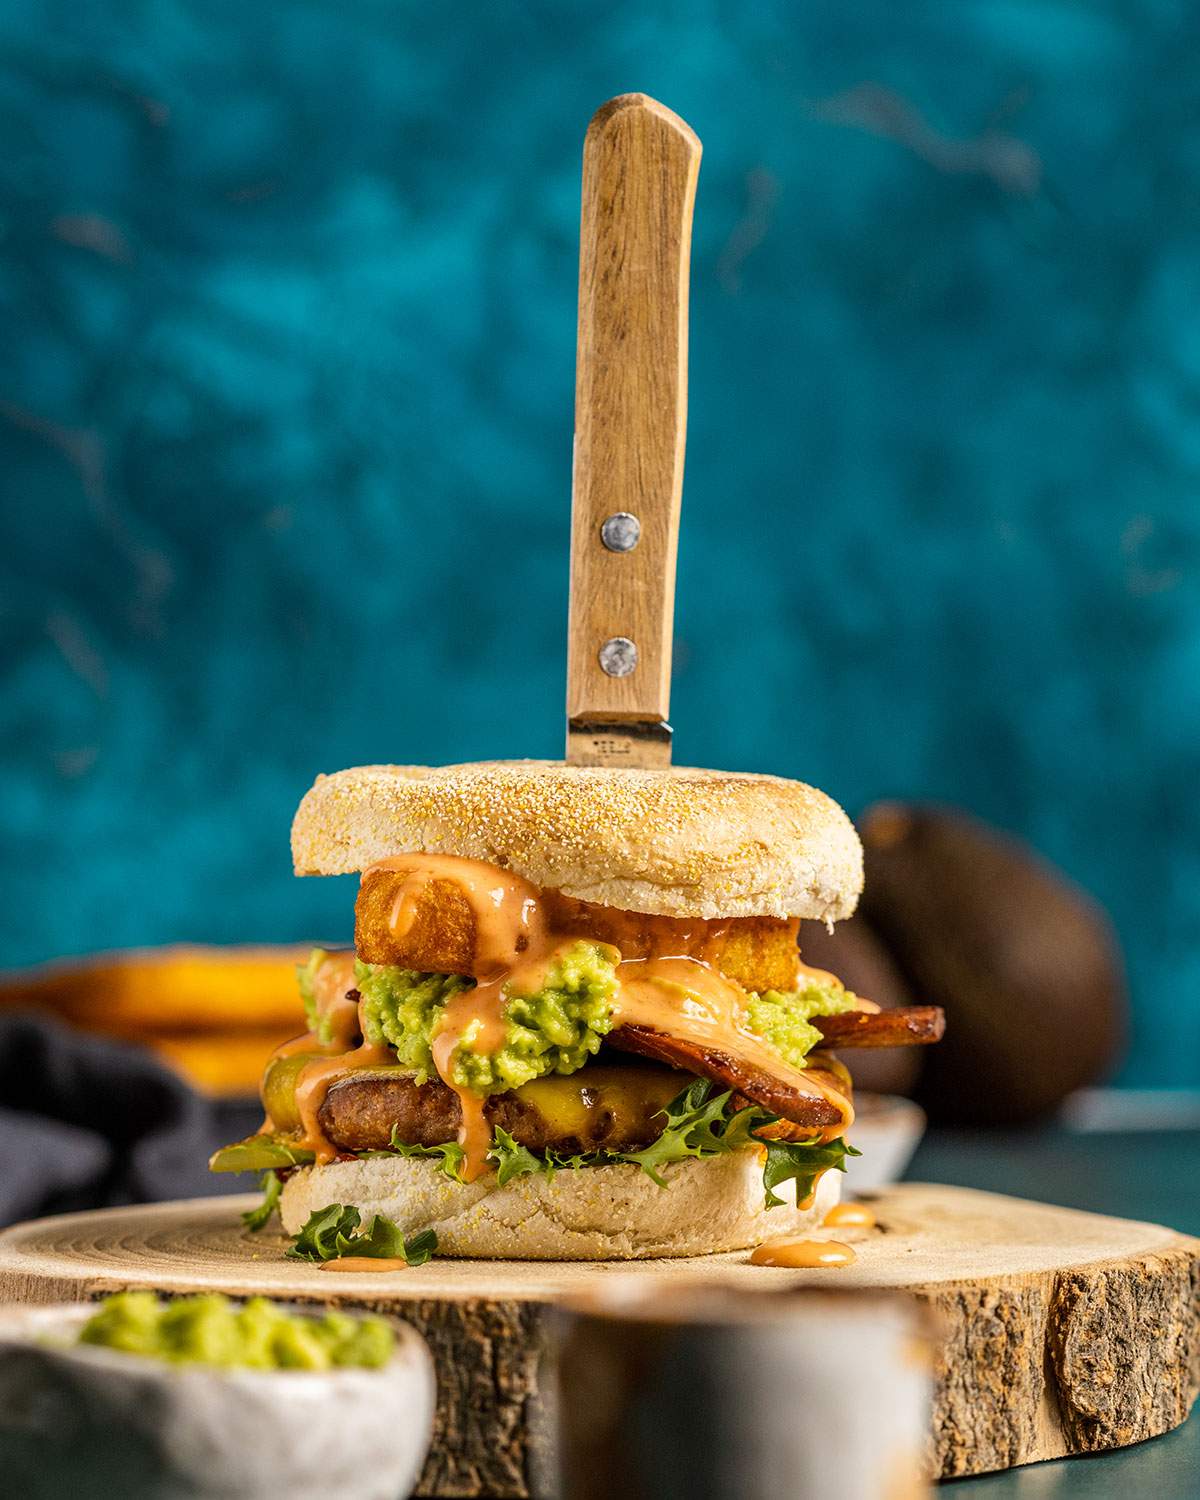 A savory vegan breakfast burger on a wooden serving tray with a knife stuck in the top of the burger.